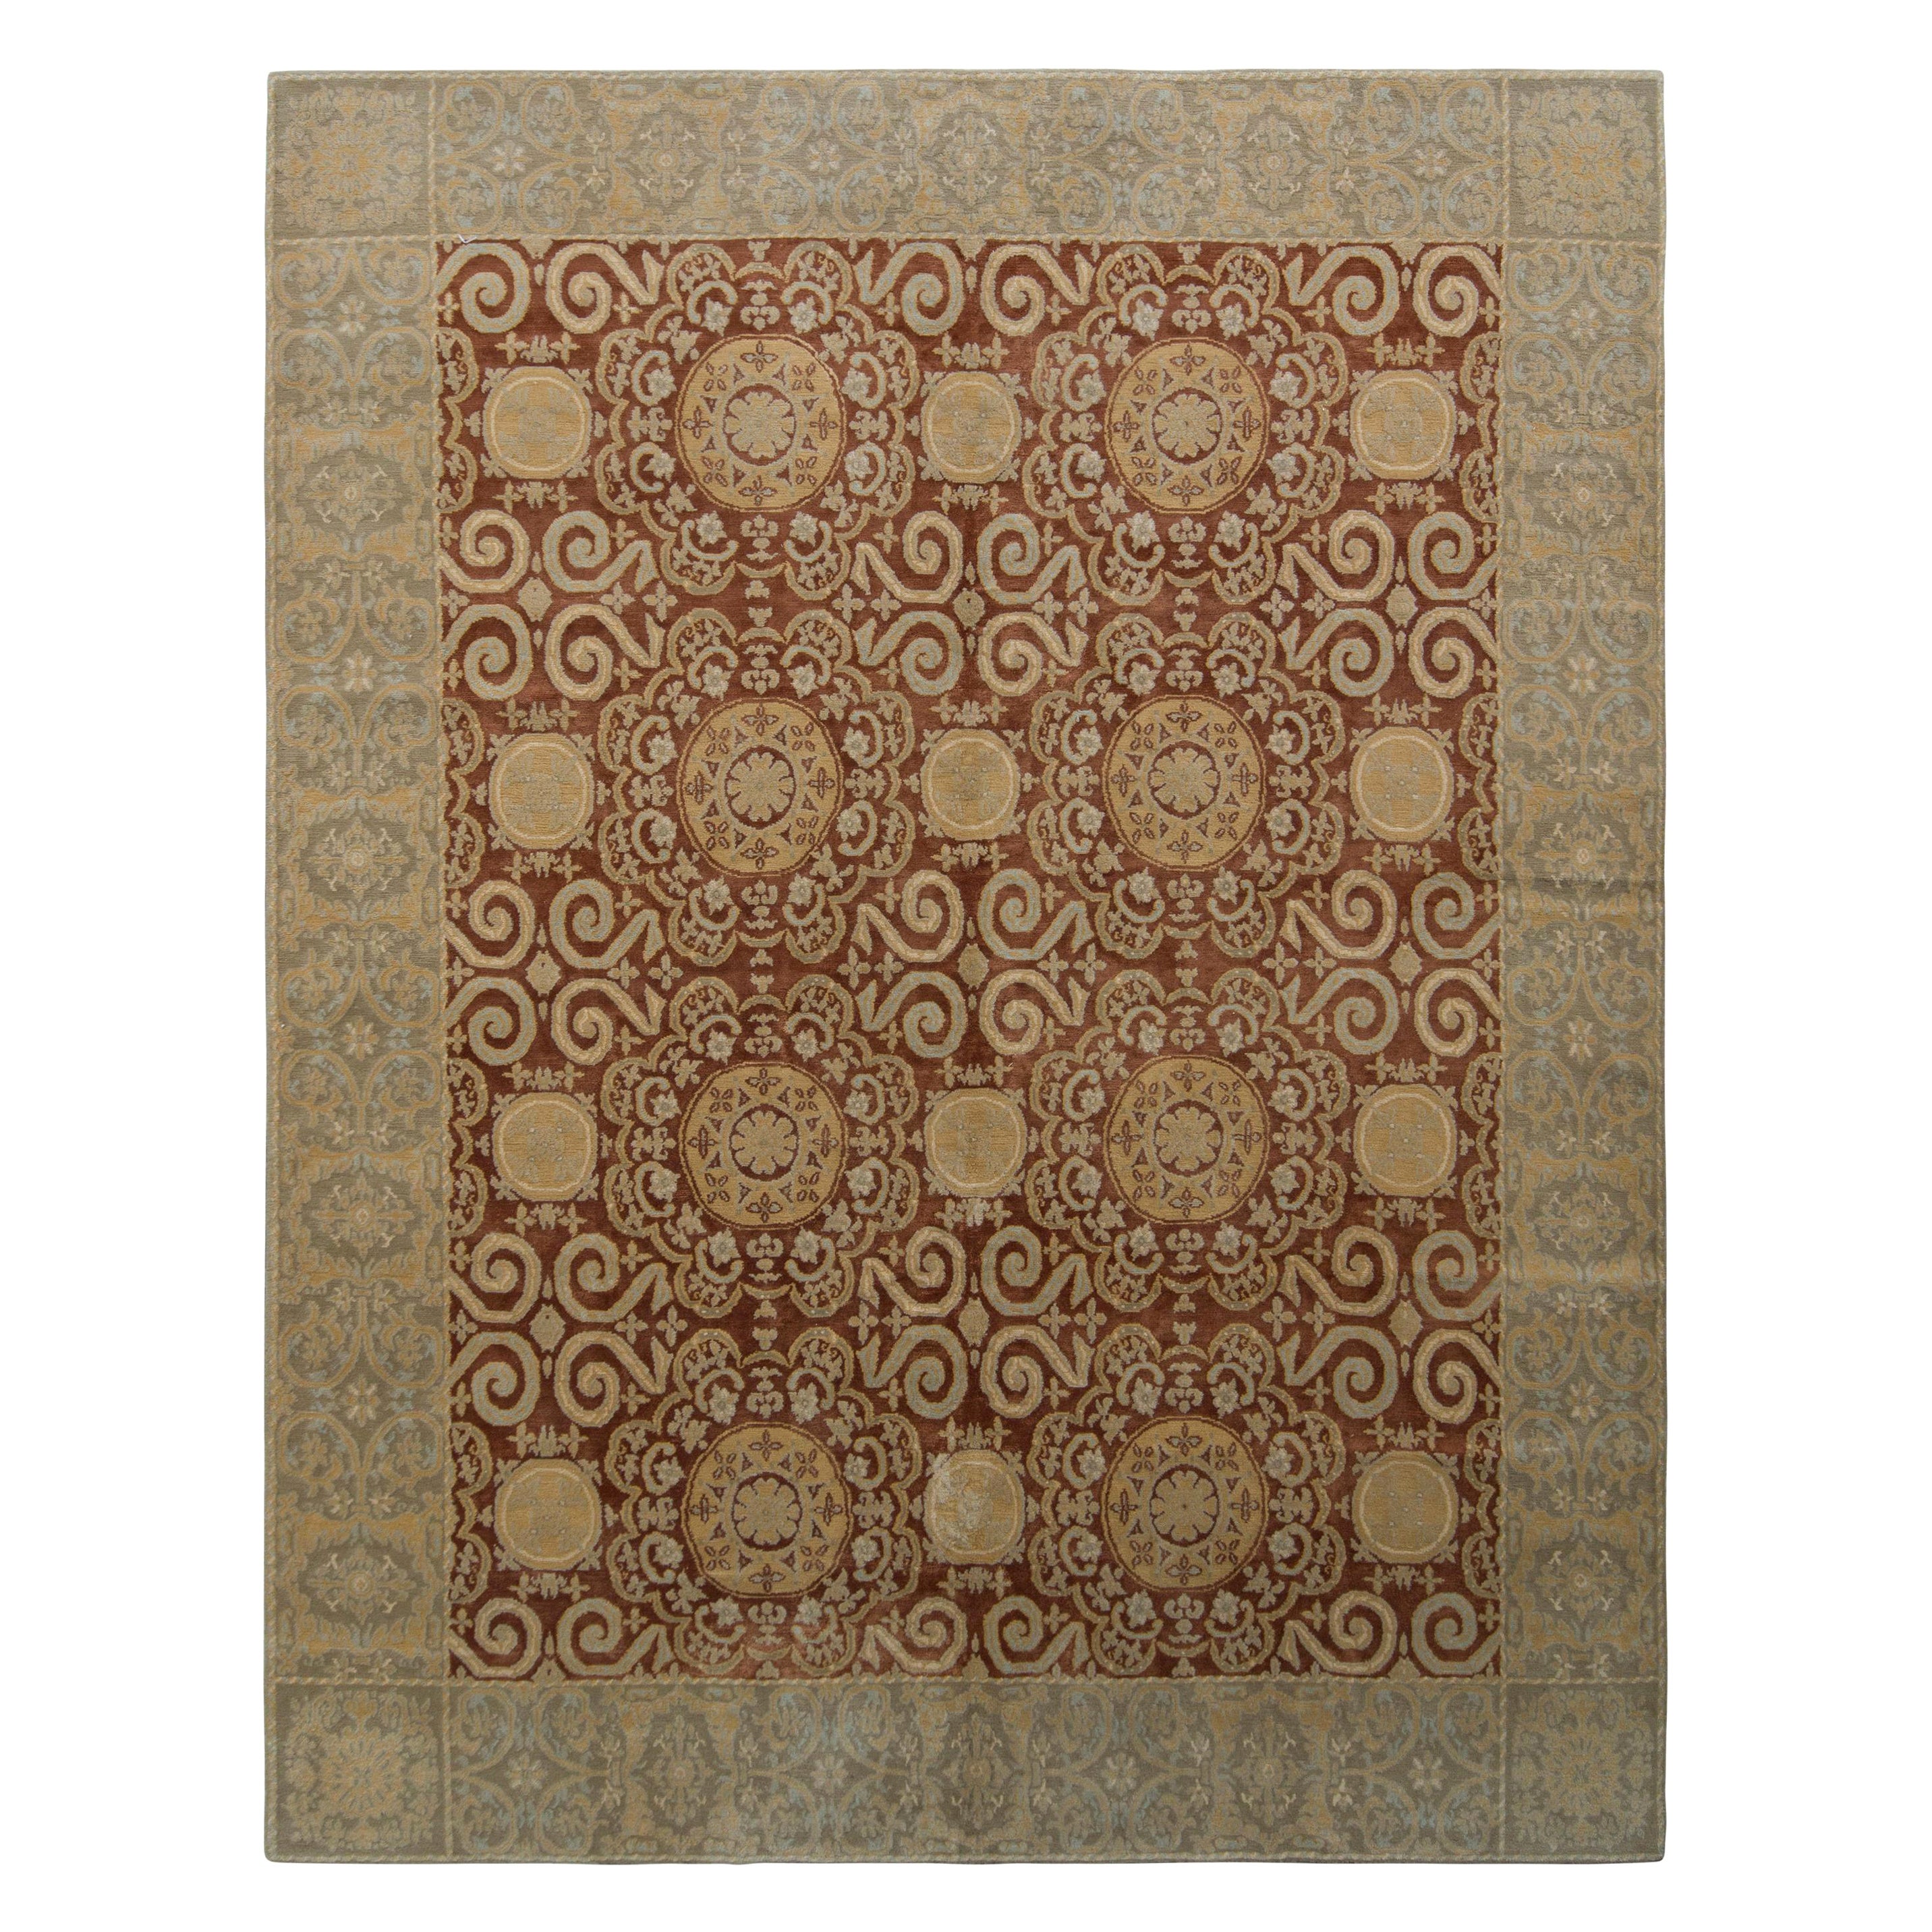 Rug & Kilim’s European Style Rug in Beige-Brown and Blue All Over Pattern For Sale